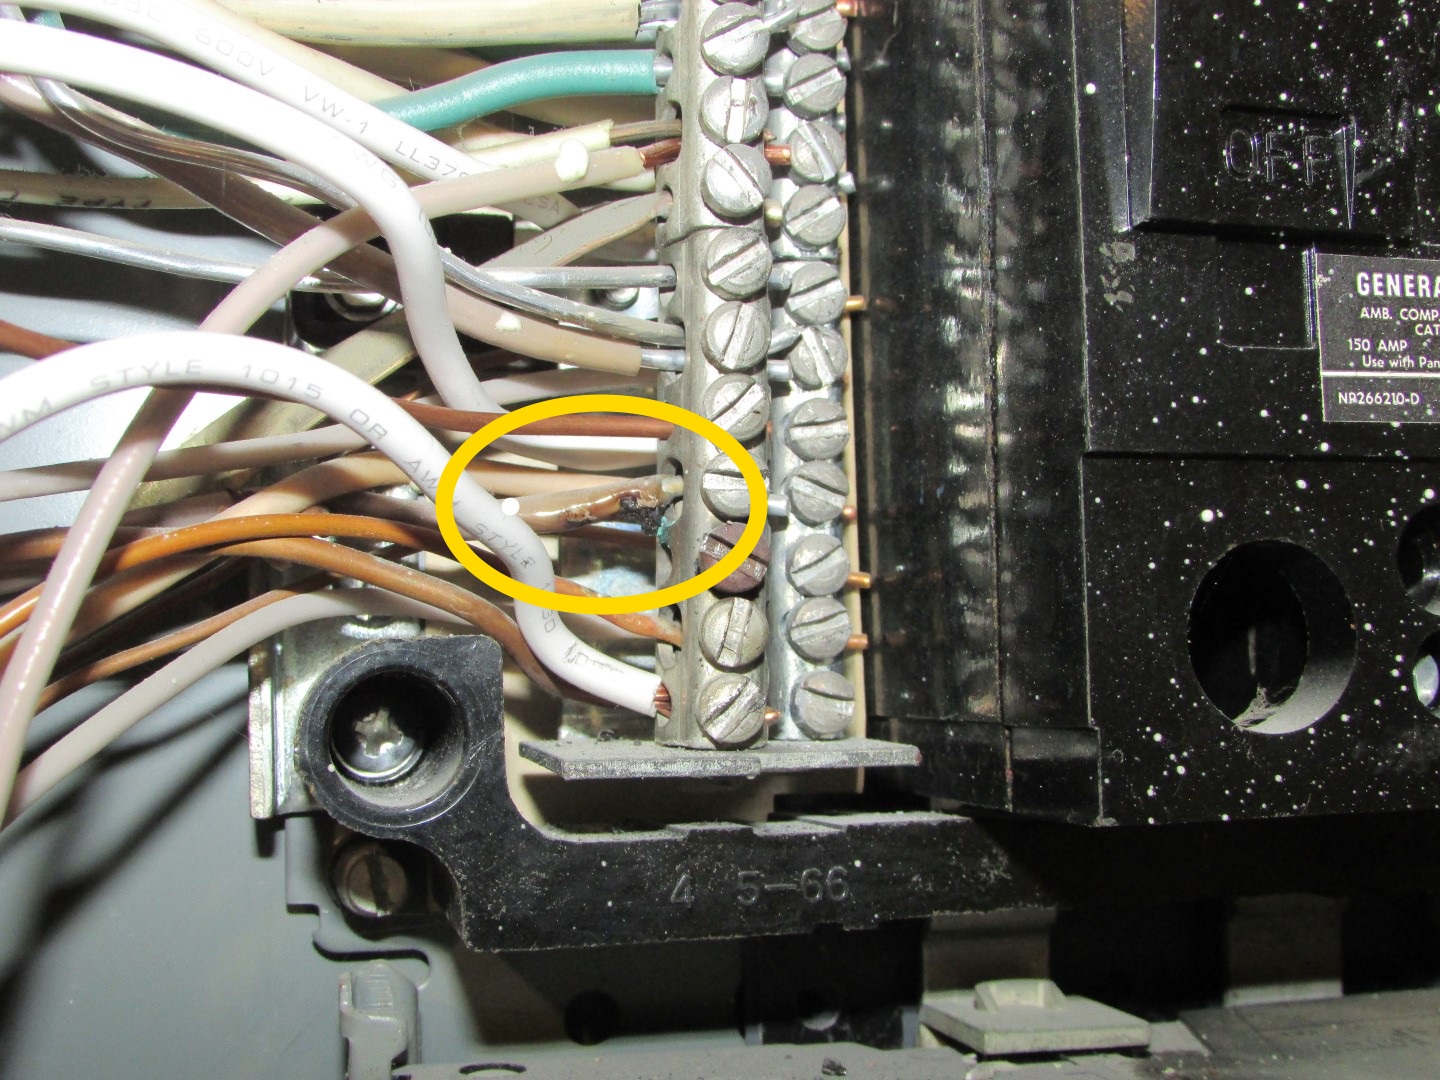 Did they wiring using cloth when stop Common Wiring